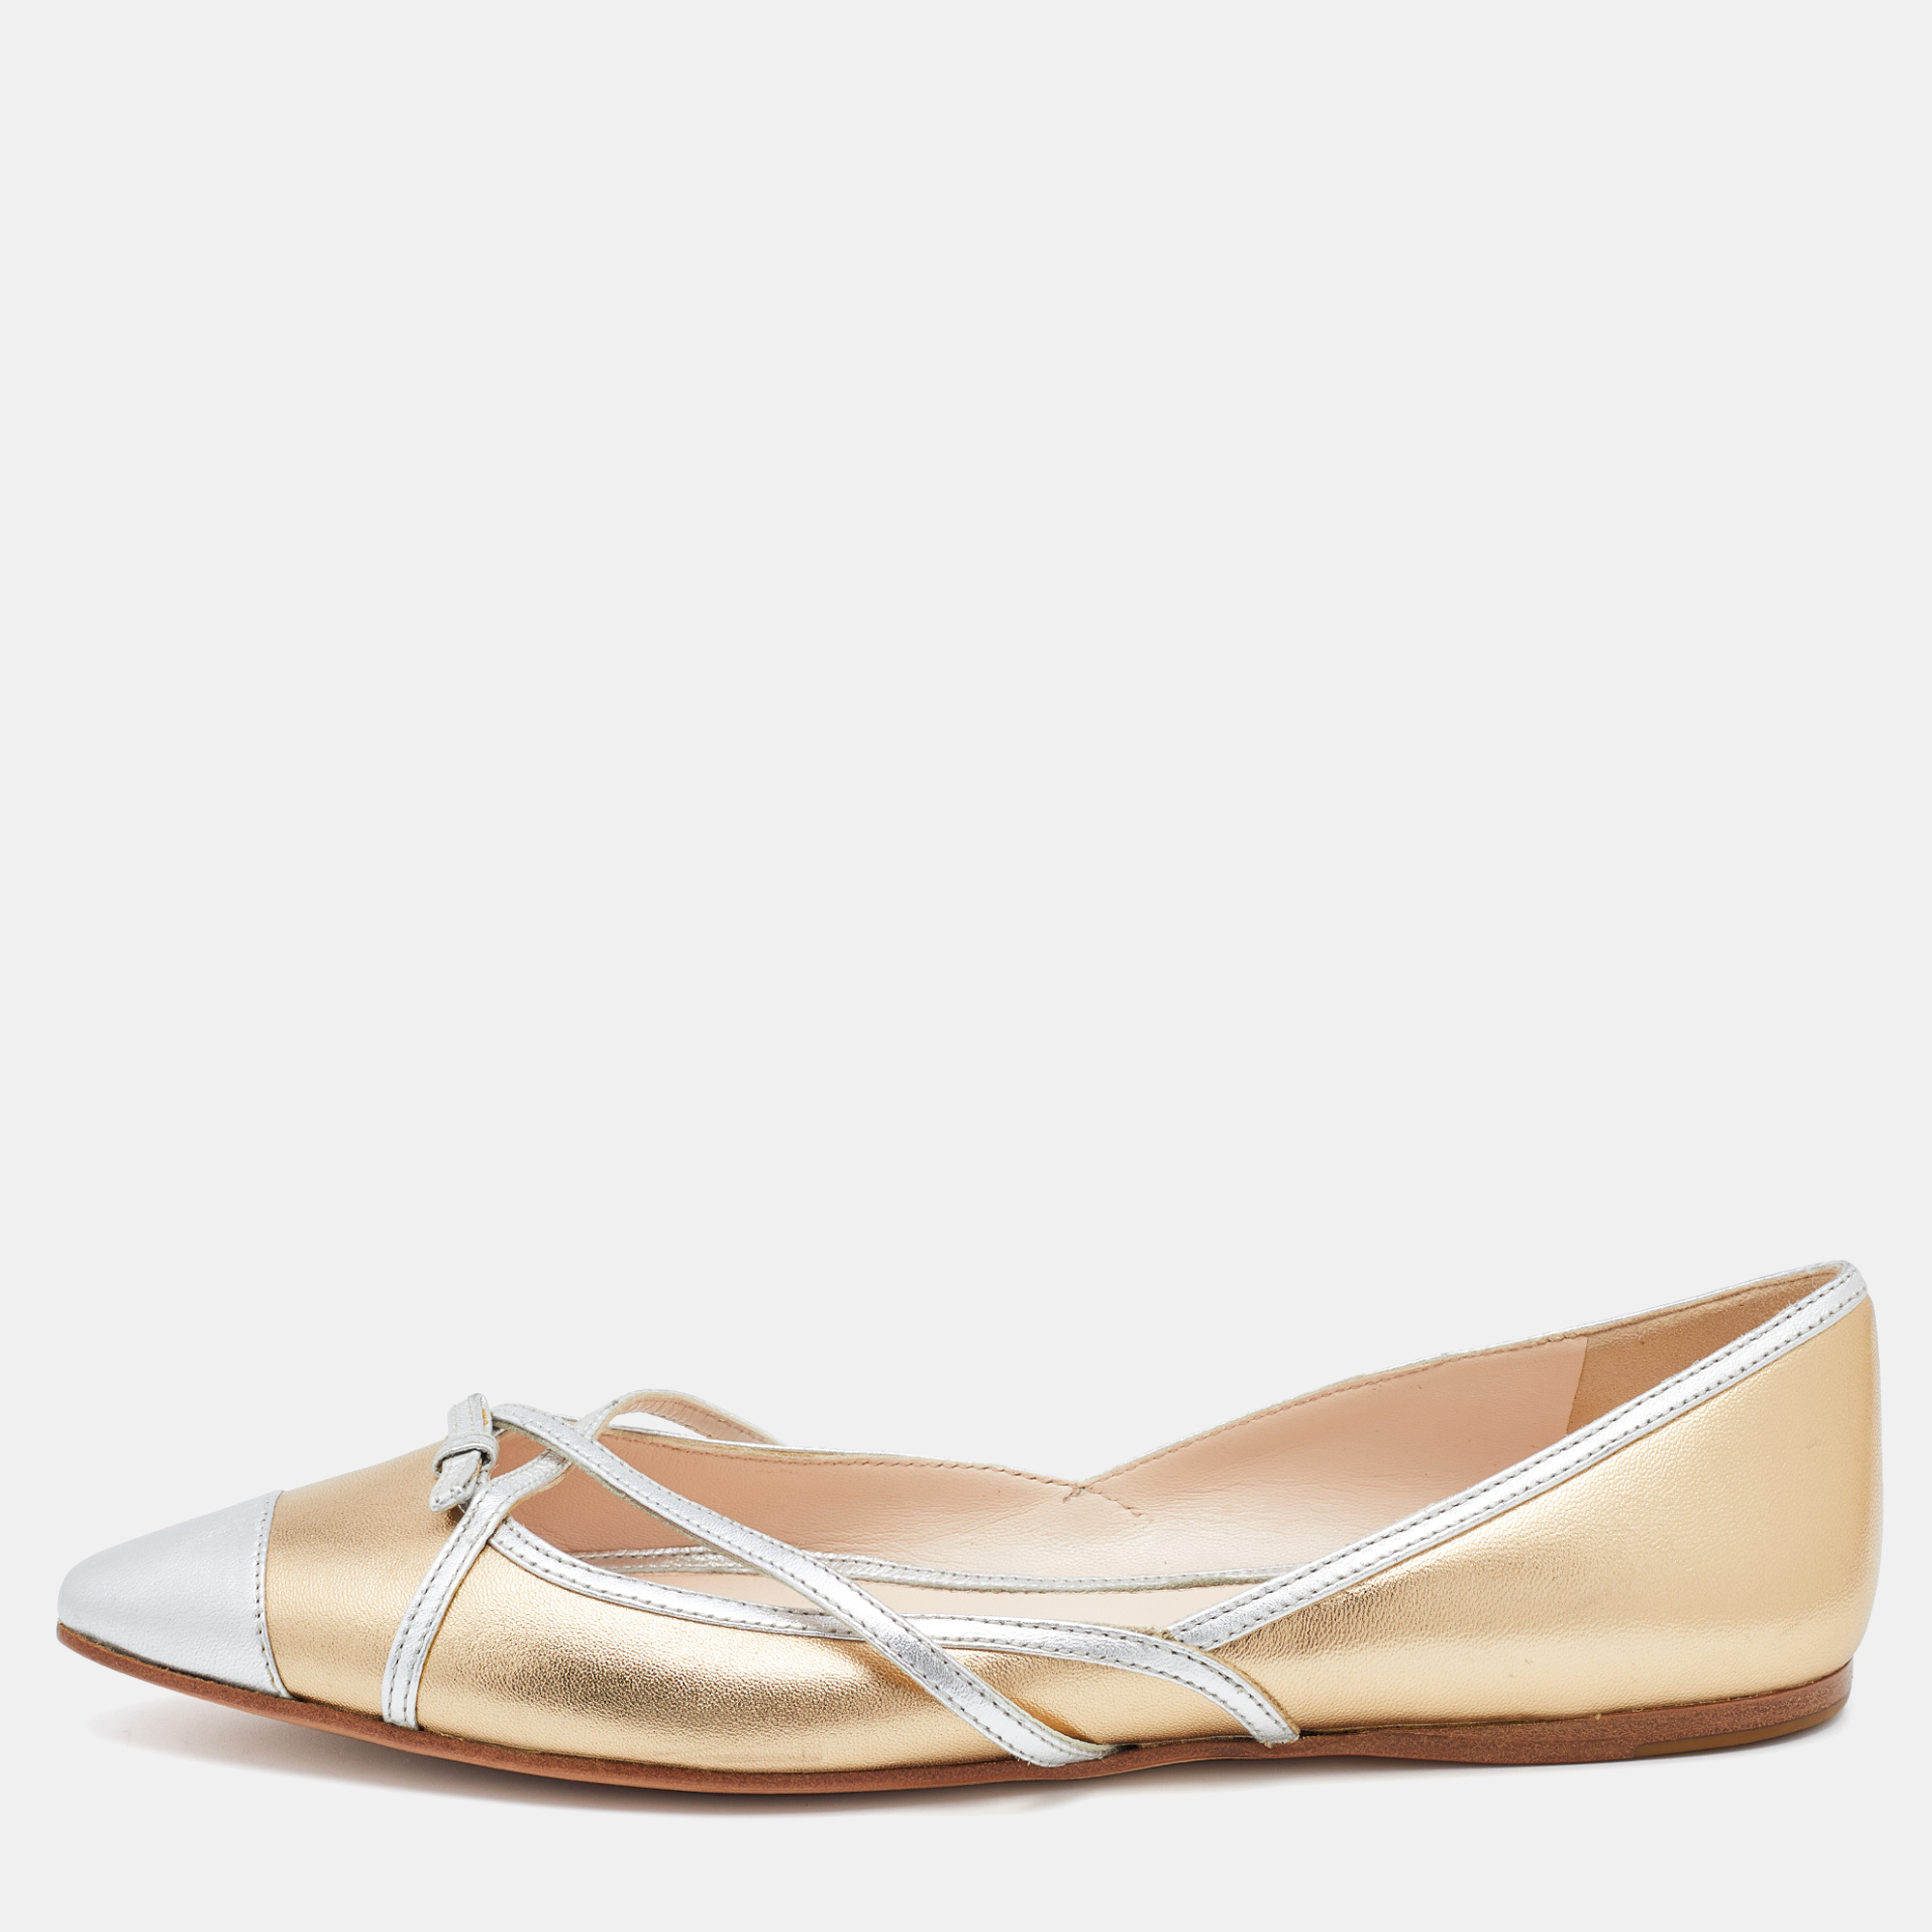 Pre-owned Prada Gold/silver Leather Bow Pointed Toe Ballet Flats Size 38